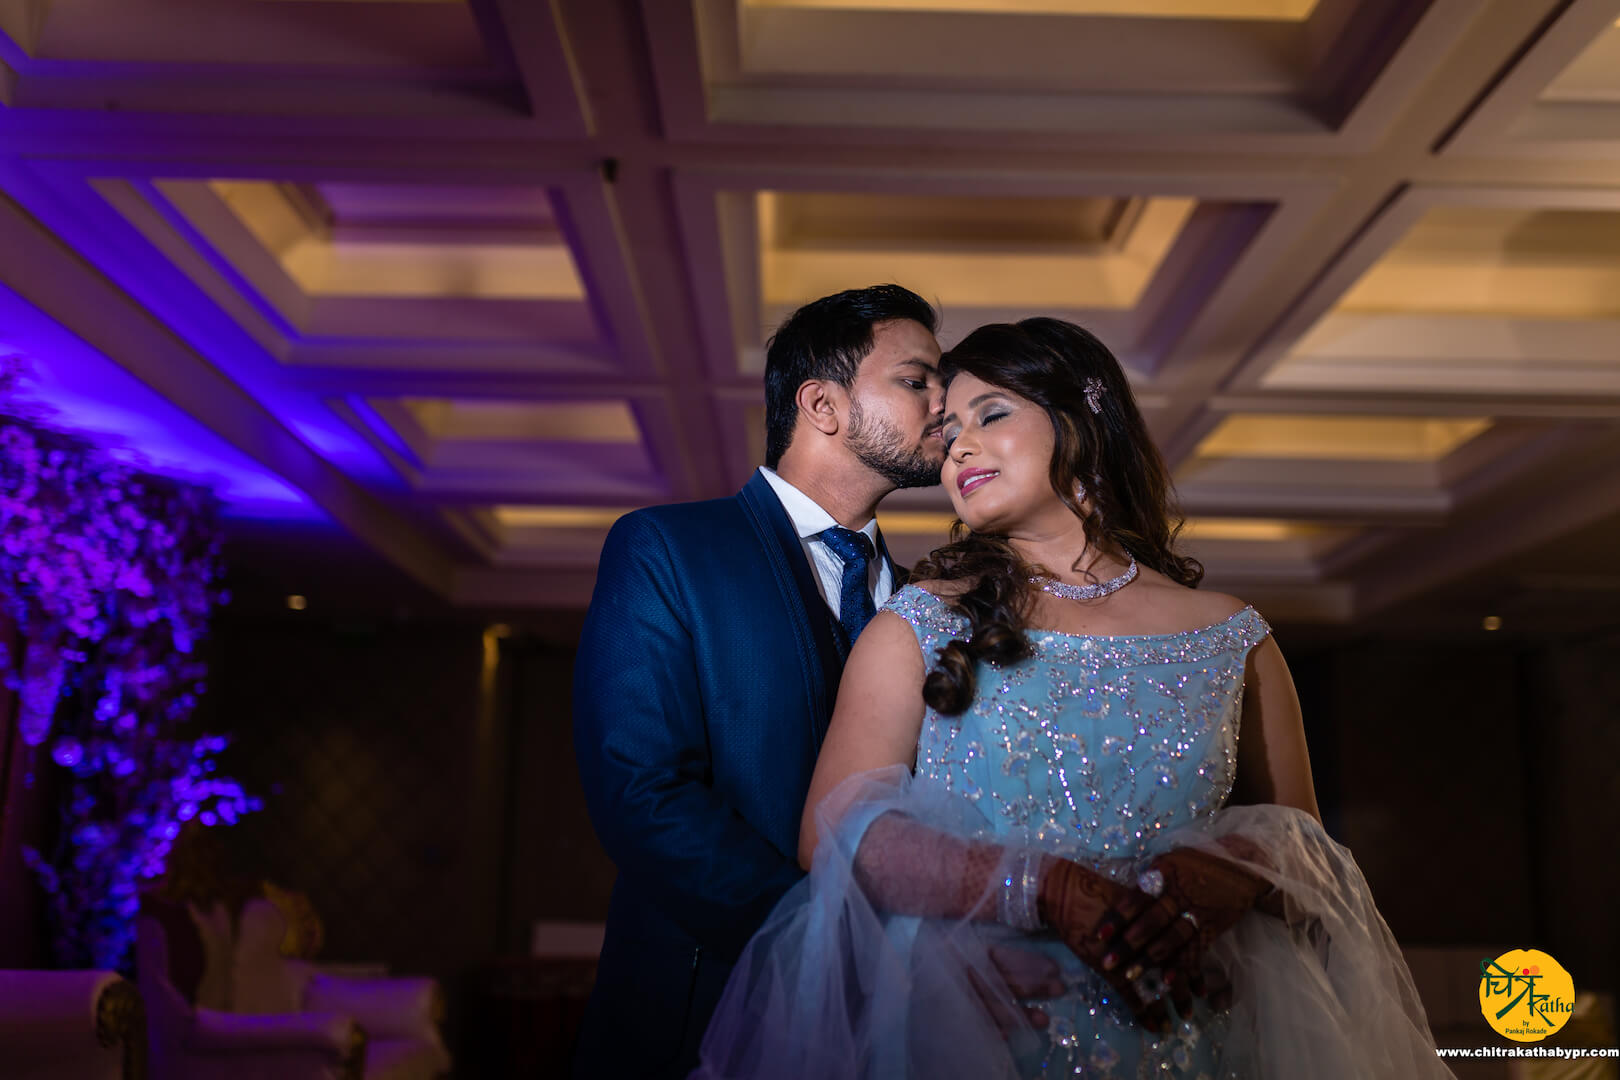 Indian Wedding Photography - Shan Photography | Indian wedding photography  poses, Wedding couple poses photography, Engagement photography poses